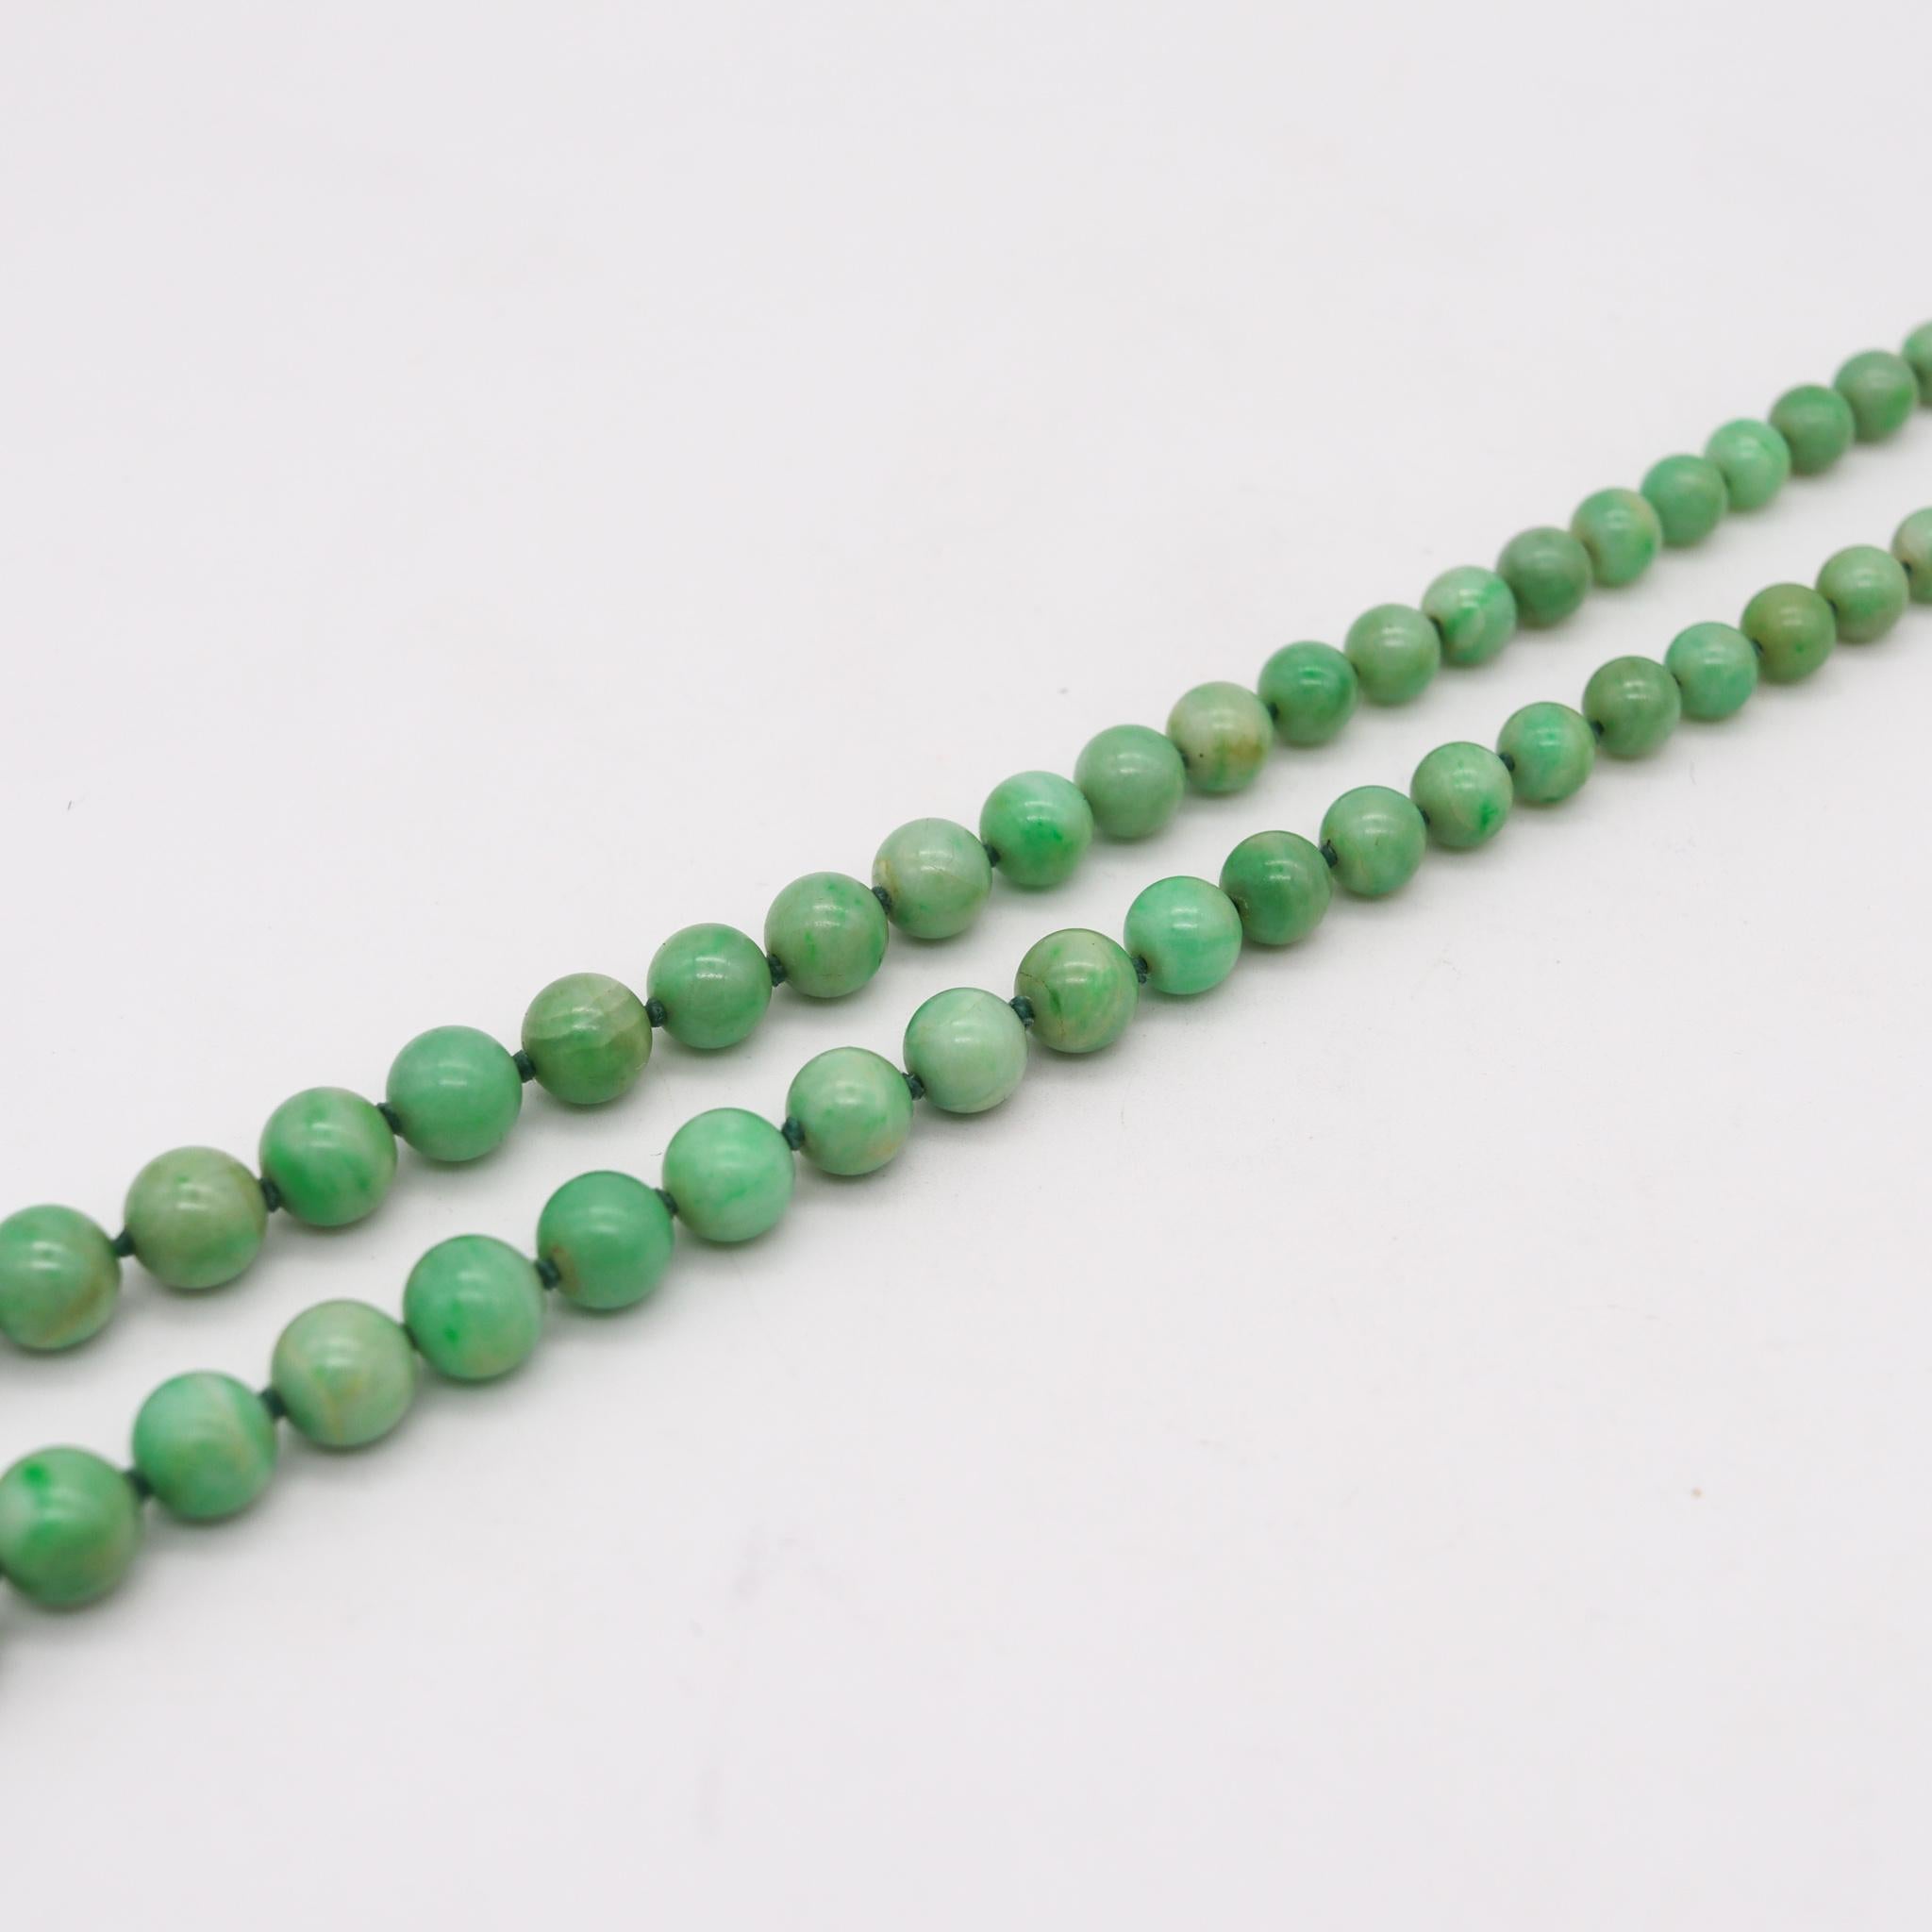 Women's Art Deco 1930 Graduated Beads Necklace with Nephrite Jadeite Jade and 18kt Gold For Sale